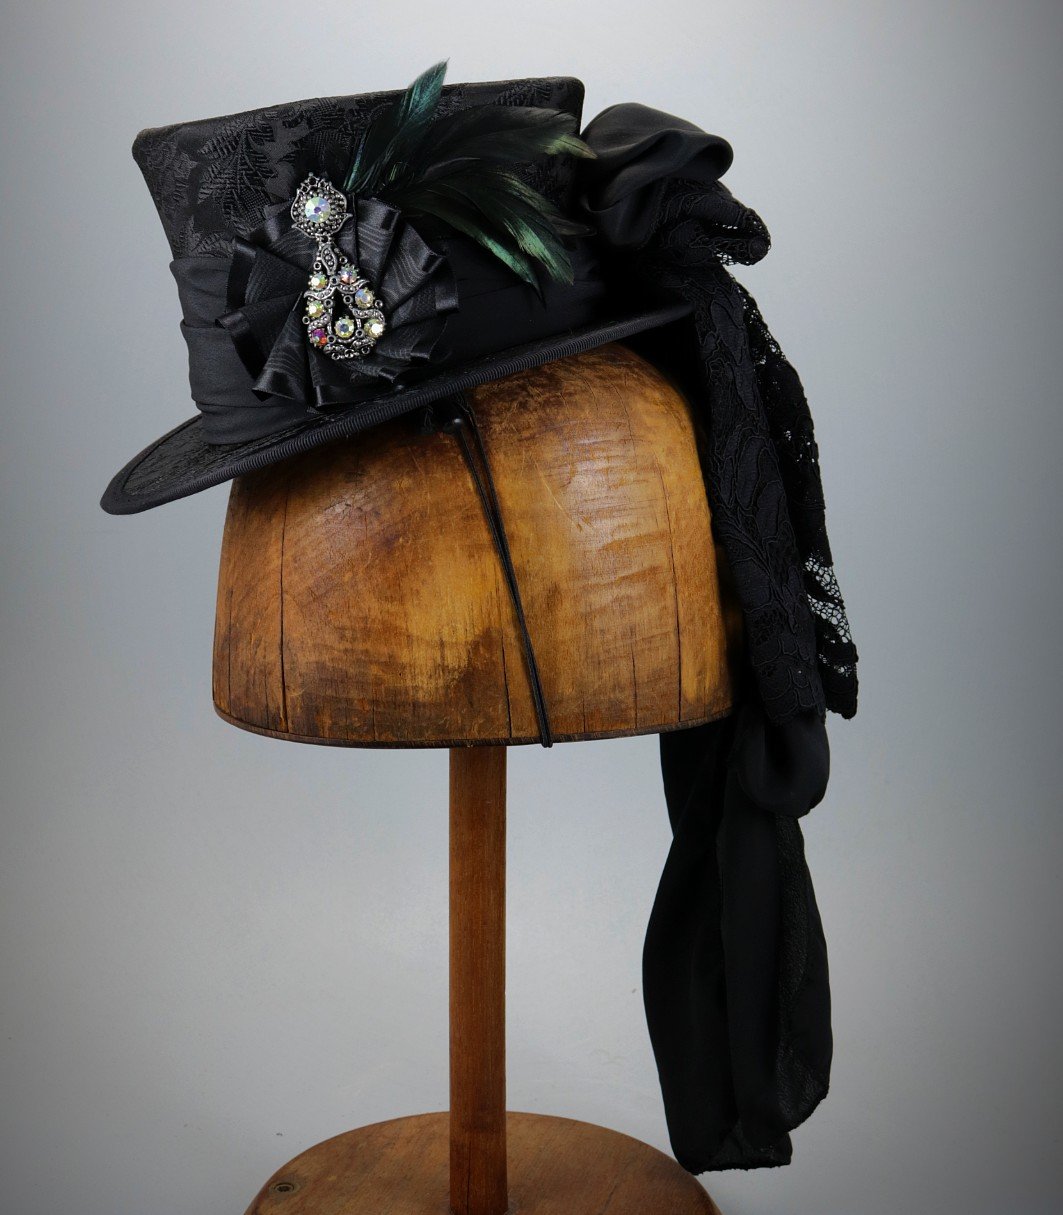 Black Mini Top Hat with Antique Brooch and Ribbon Cockade